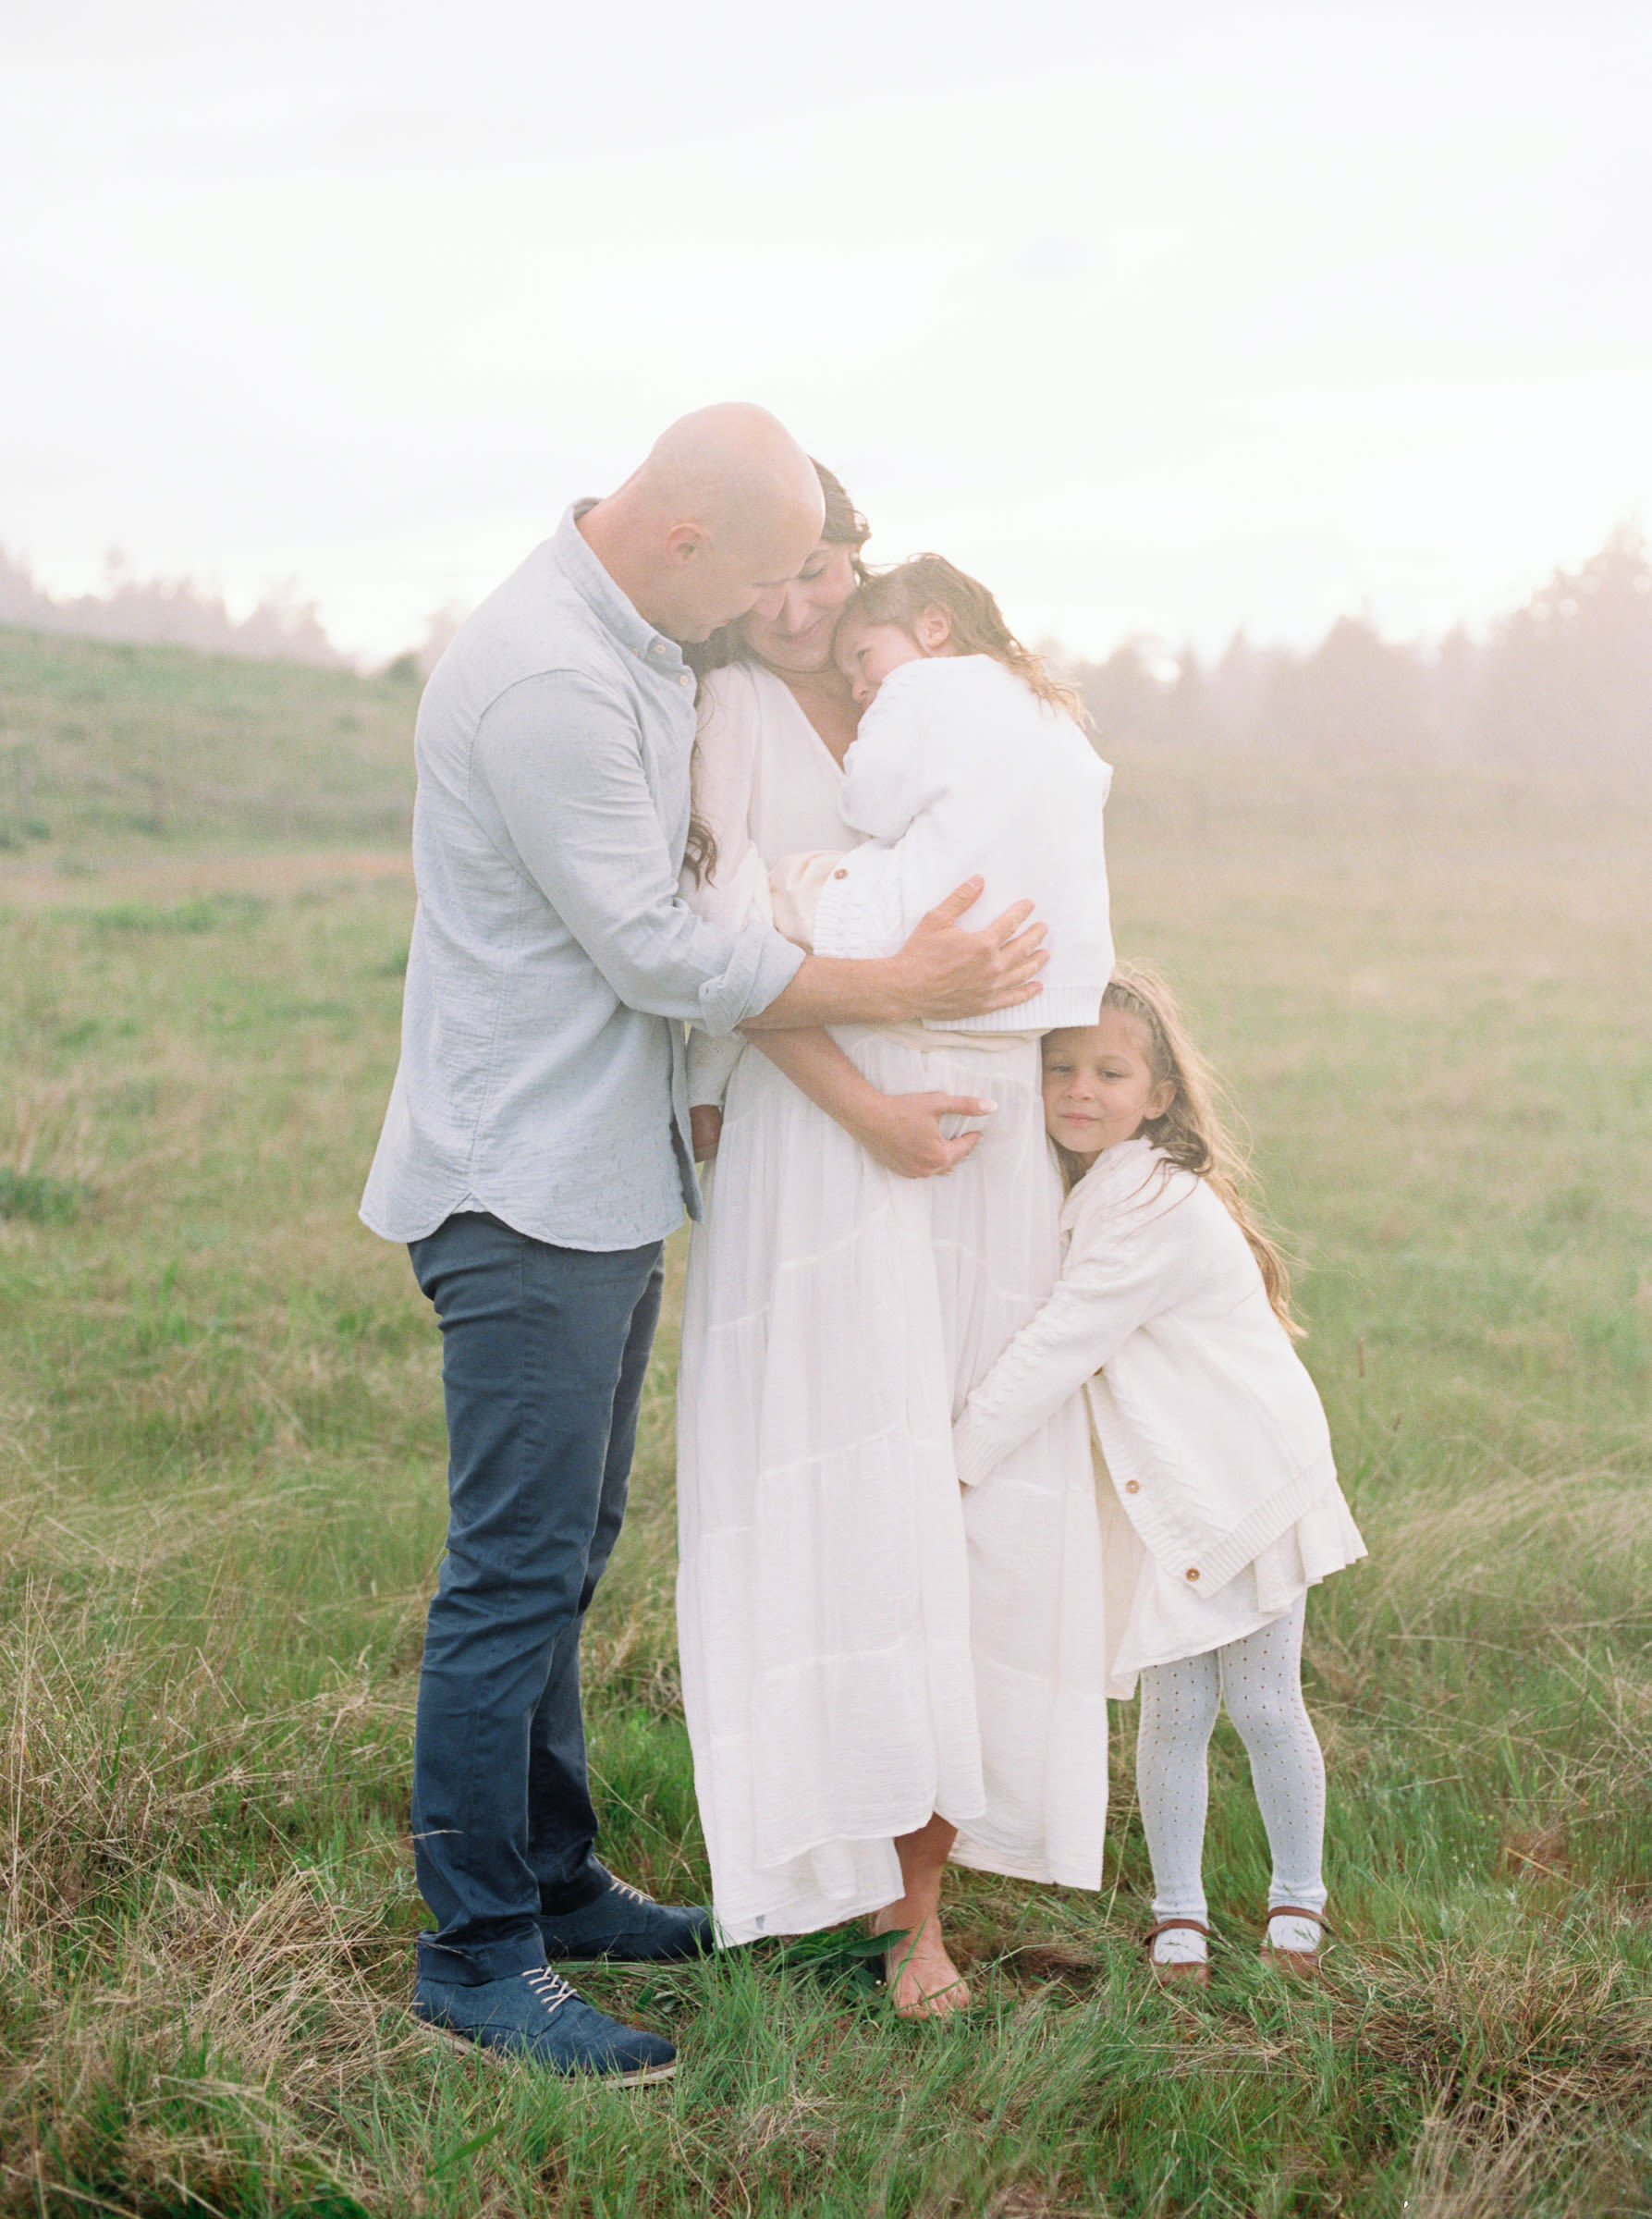 Family hugging each other in a field